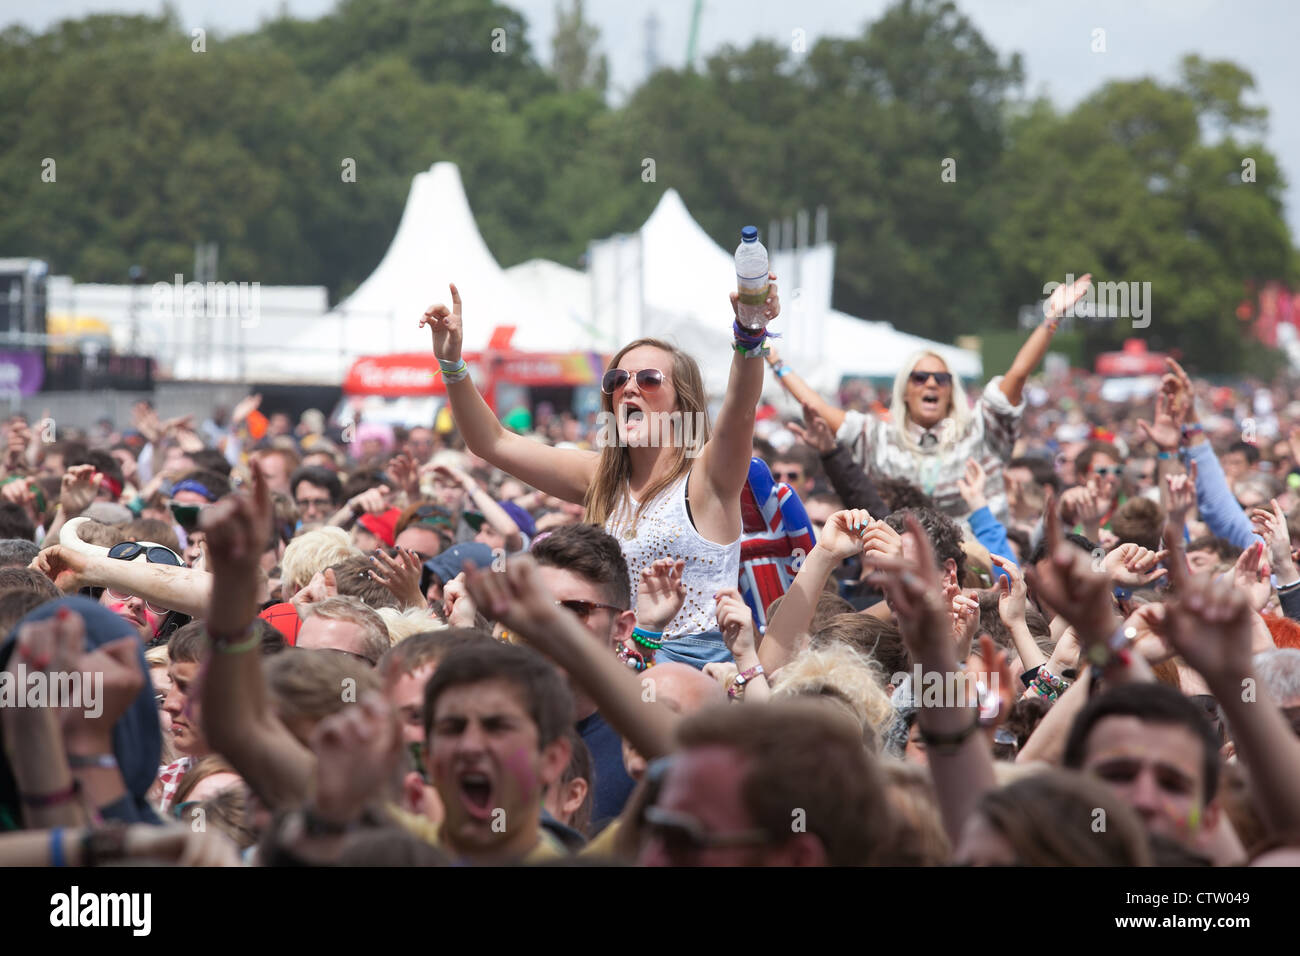 Crowd at a Music Festival Stock Photo